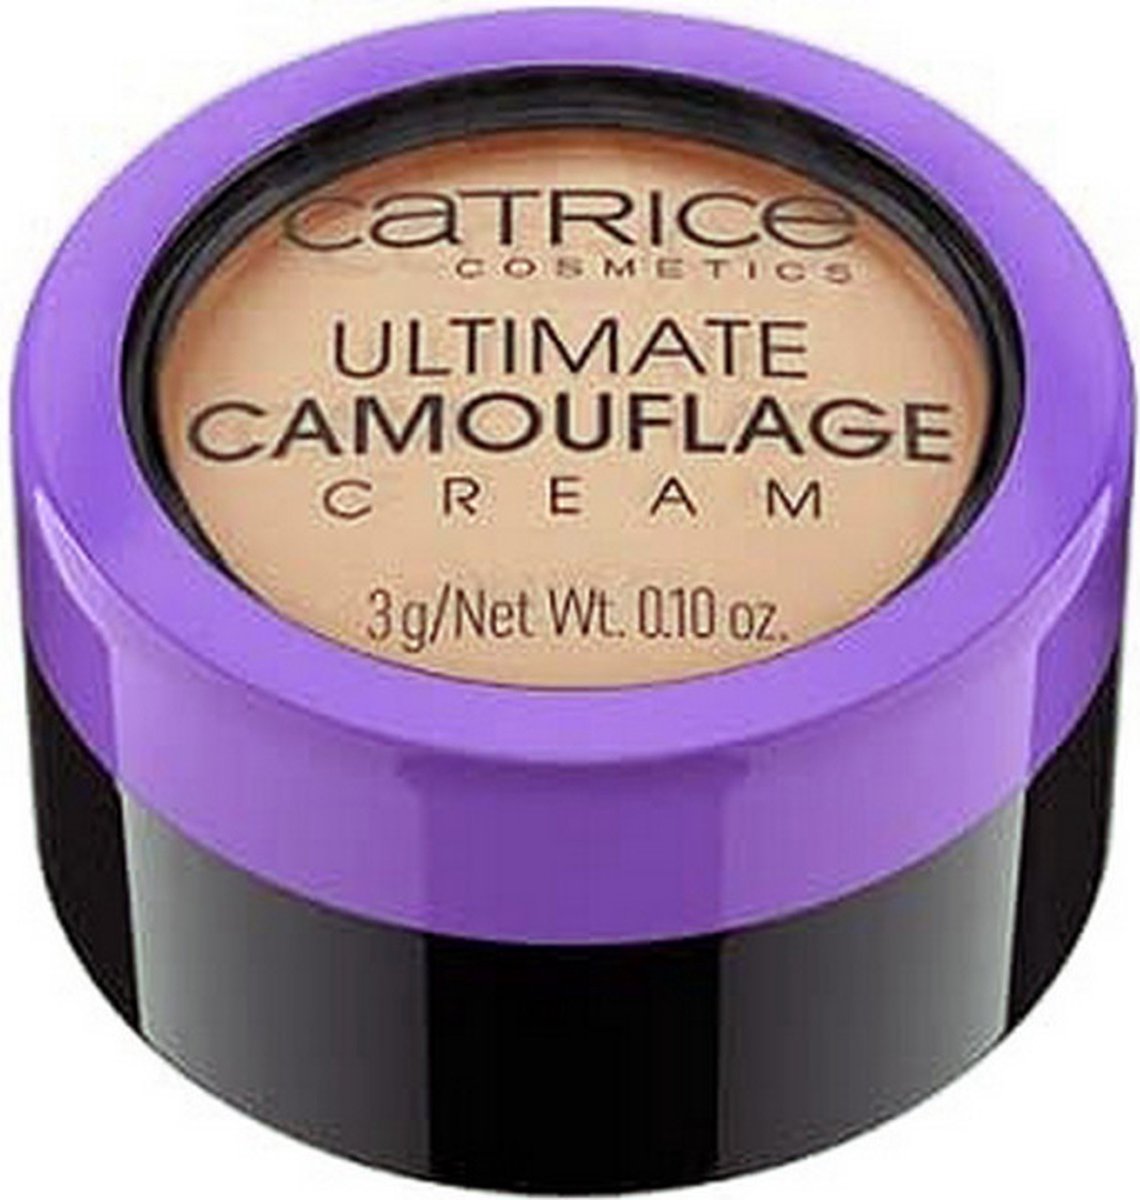 Gezichts Corrector Catrice Ultimate Camouflage 020N-light beige (3 g)